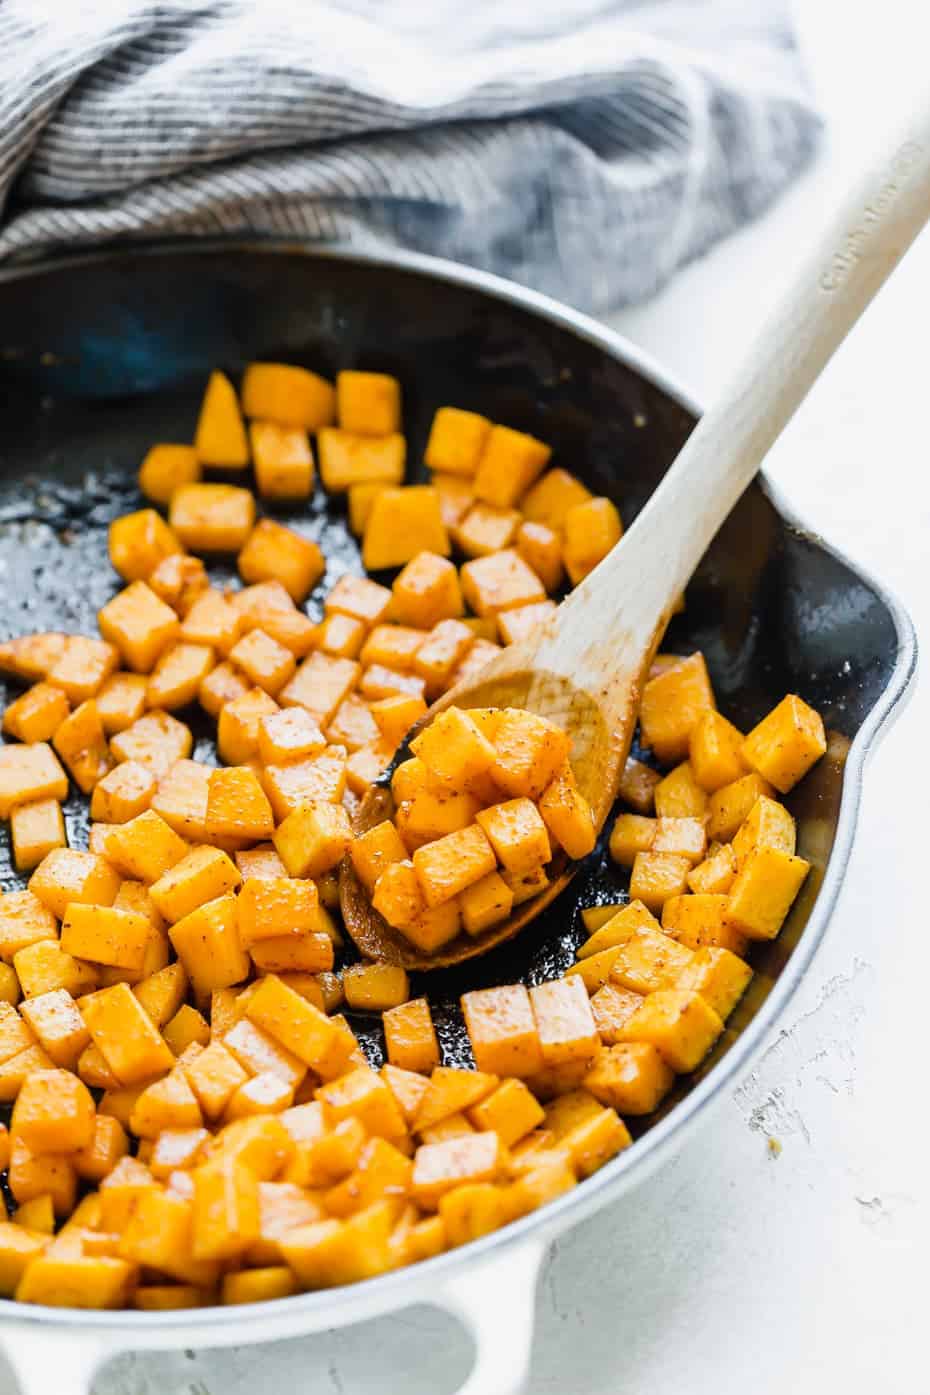 A wooden spoon scooping up diced butternut squash from a skillet.